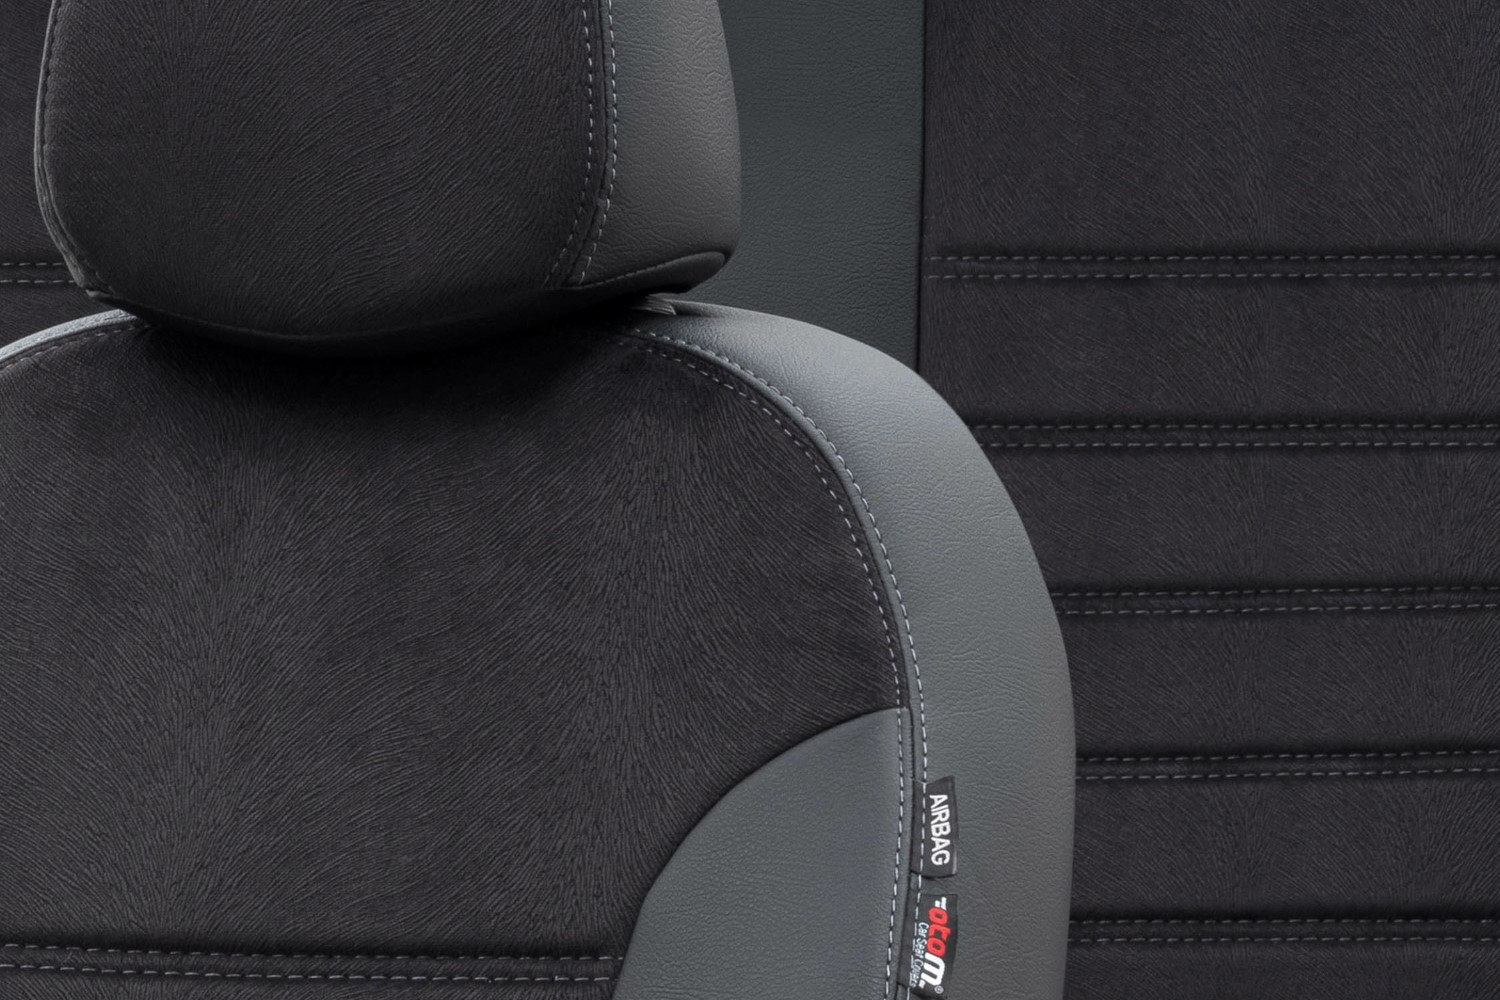 https://www.carparts-expert.com/images/stories/virtuemart/product/example-otom-car-seat-covers-london-detail-1.jpg